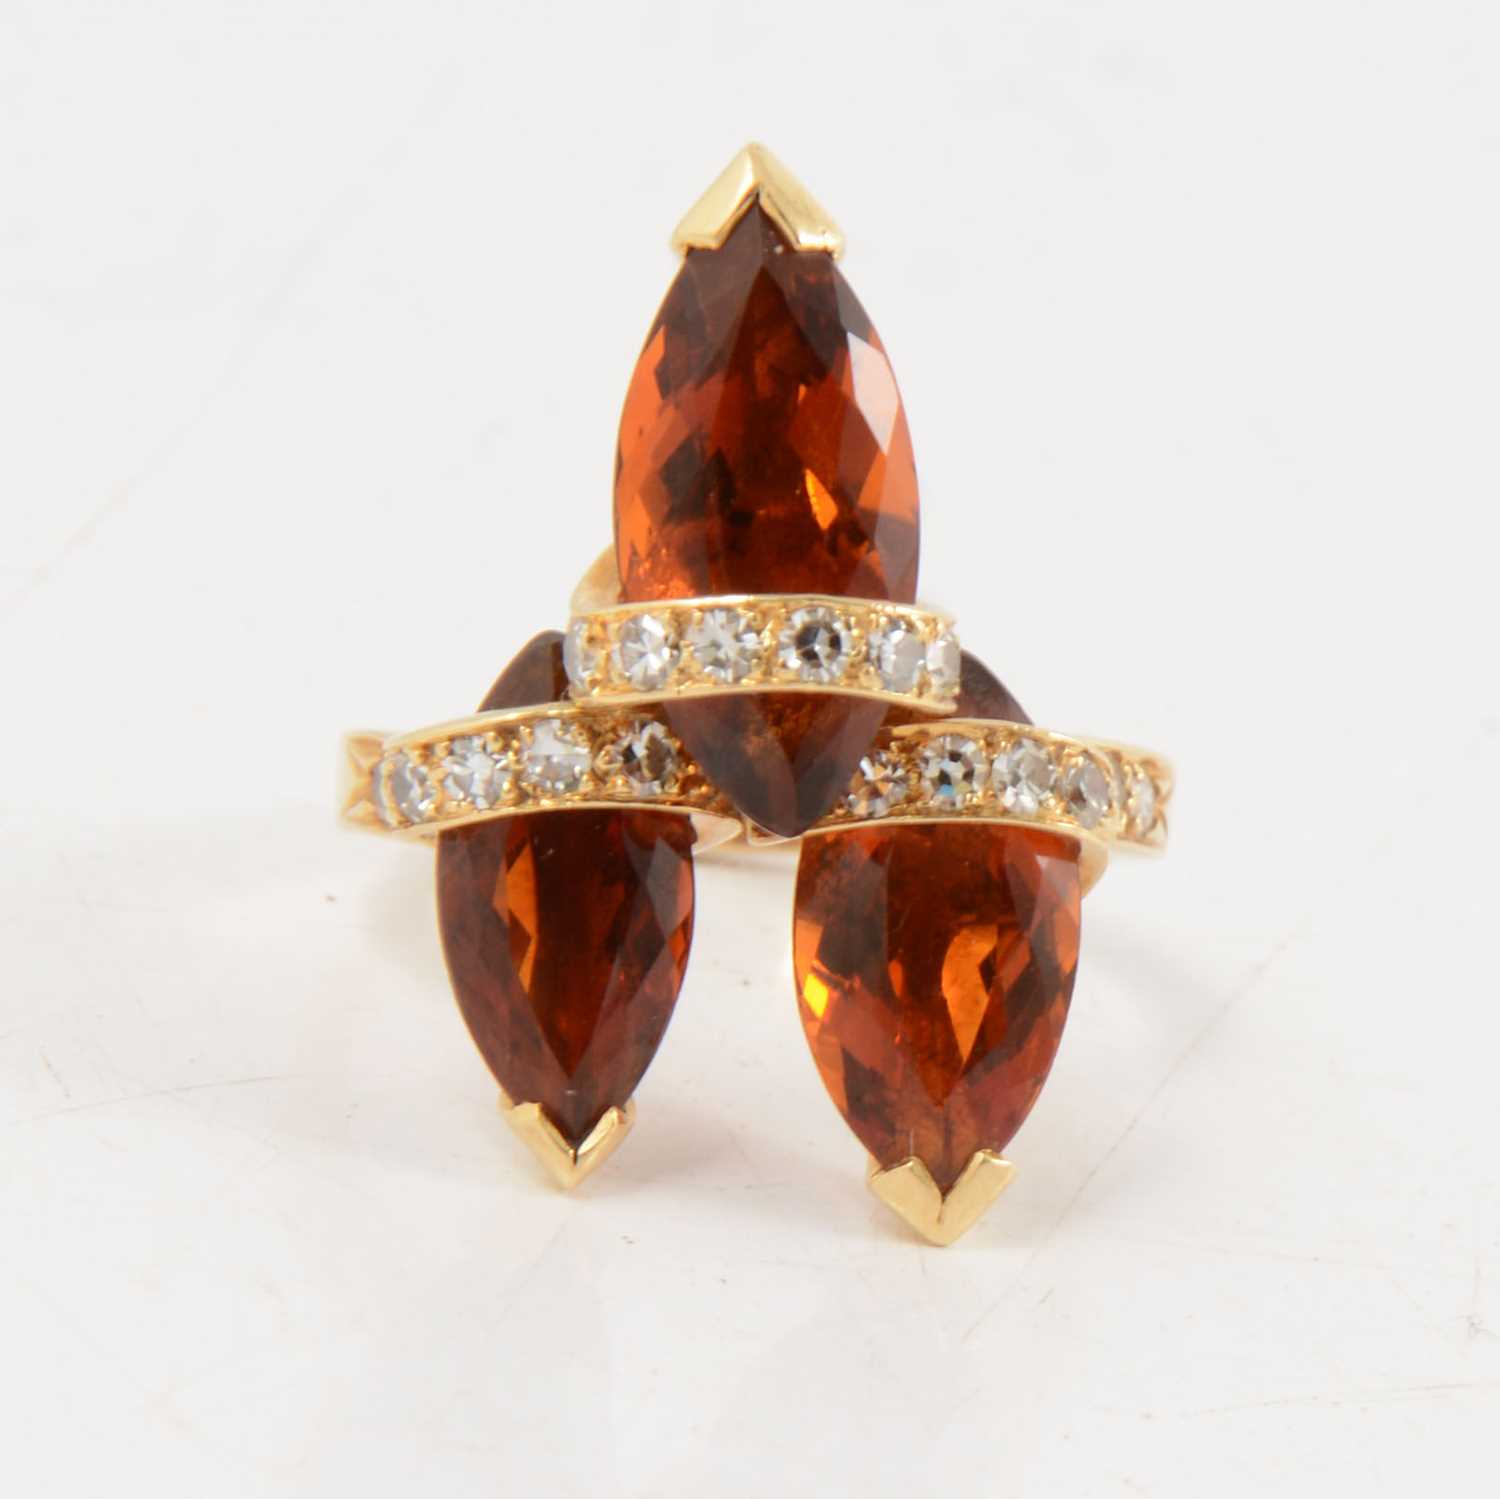 Lot 92 - Andrew Grima - an 18 carat gold diamond and gemset ring.